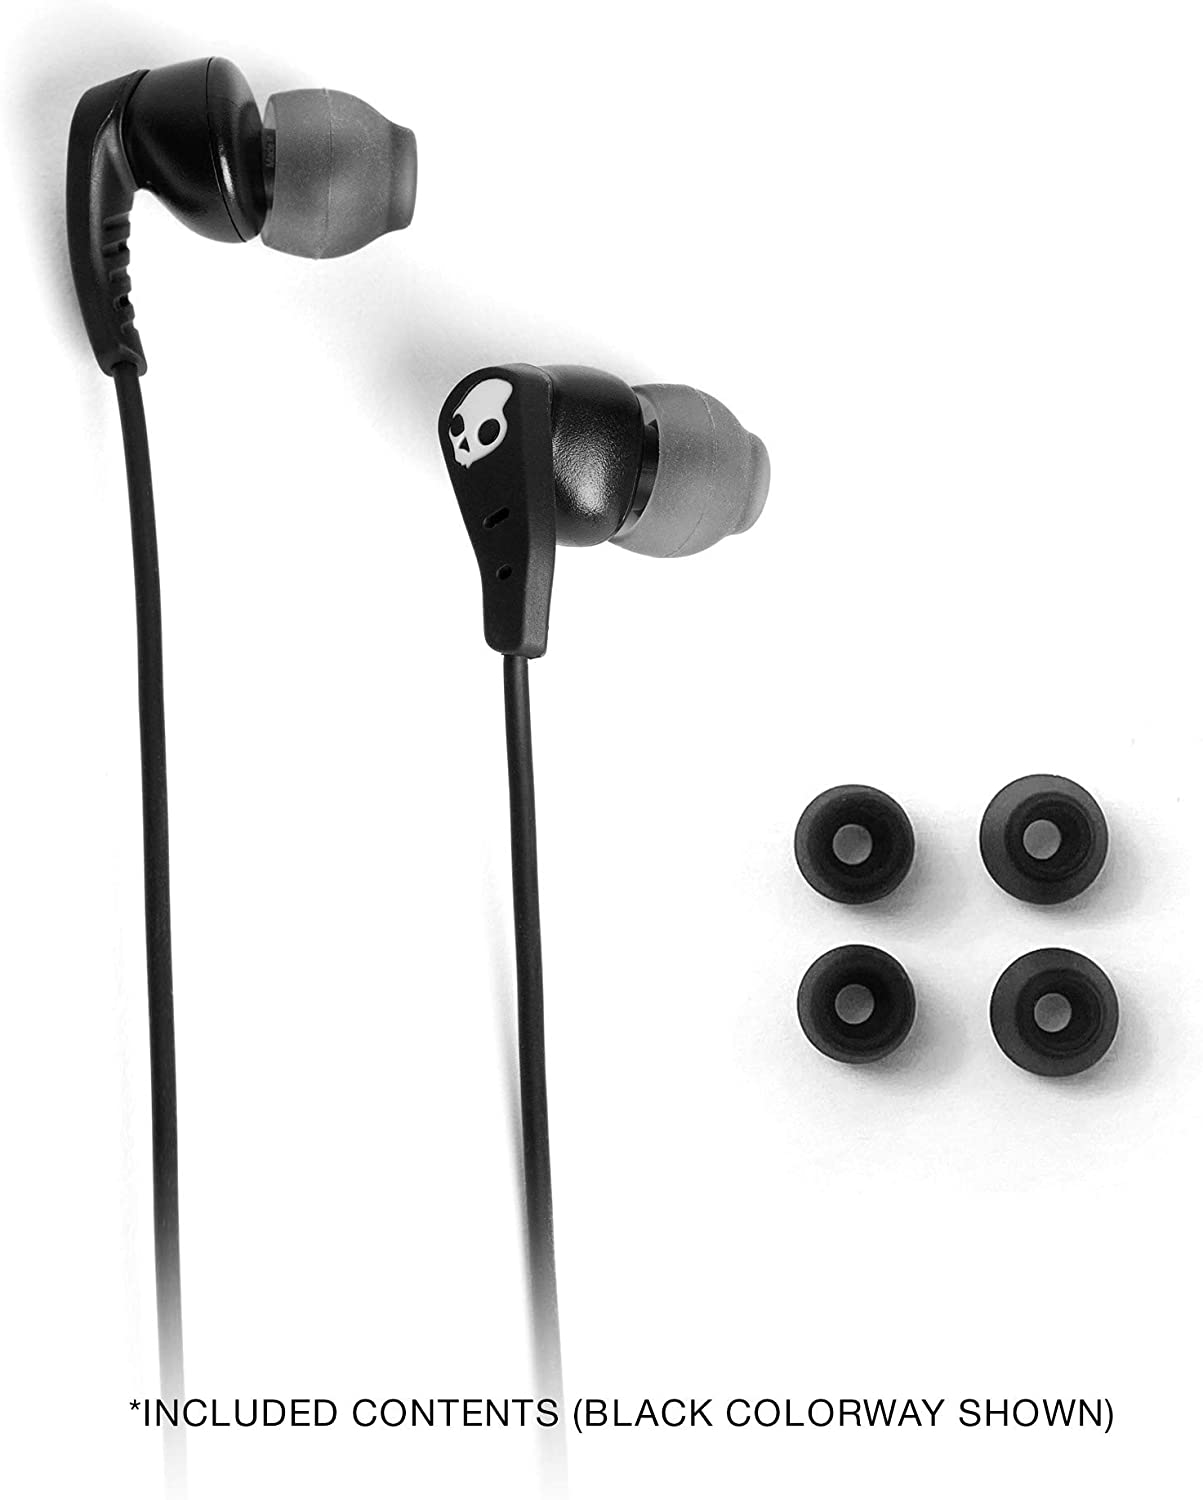 Skullcandy Set Sweat and Water Resistant In-Ear Earbuds with Microphone (TRUE BLACK) | Model S2SGY-N740